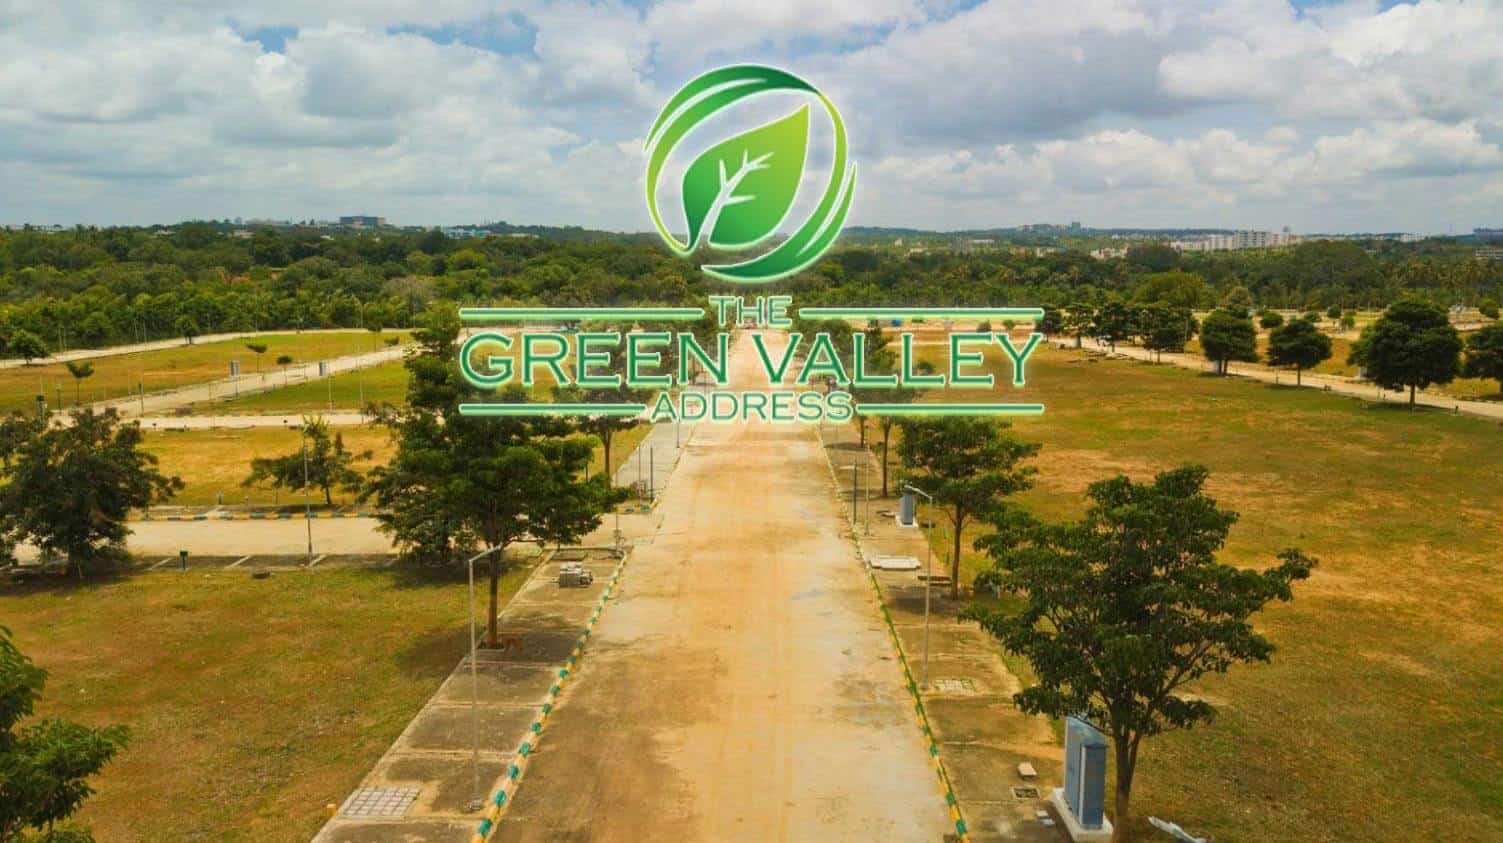 The Green Valley Address